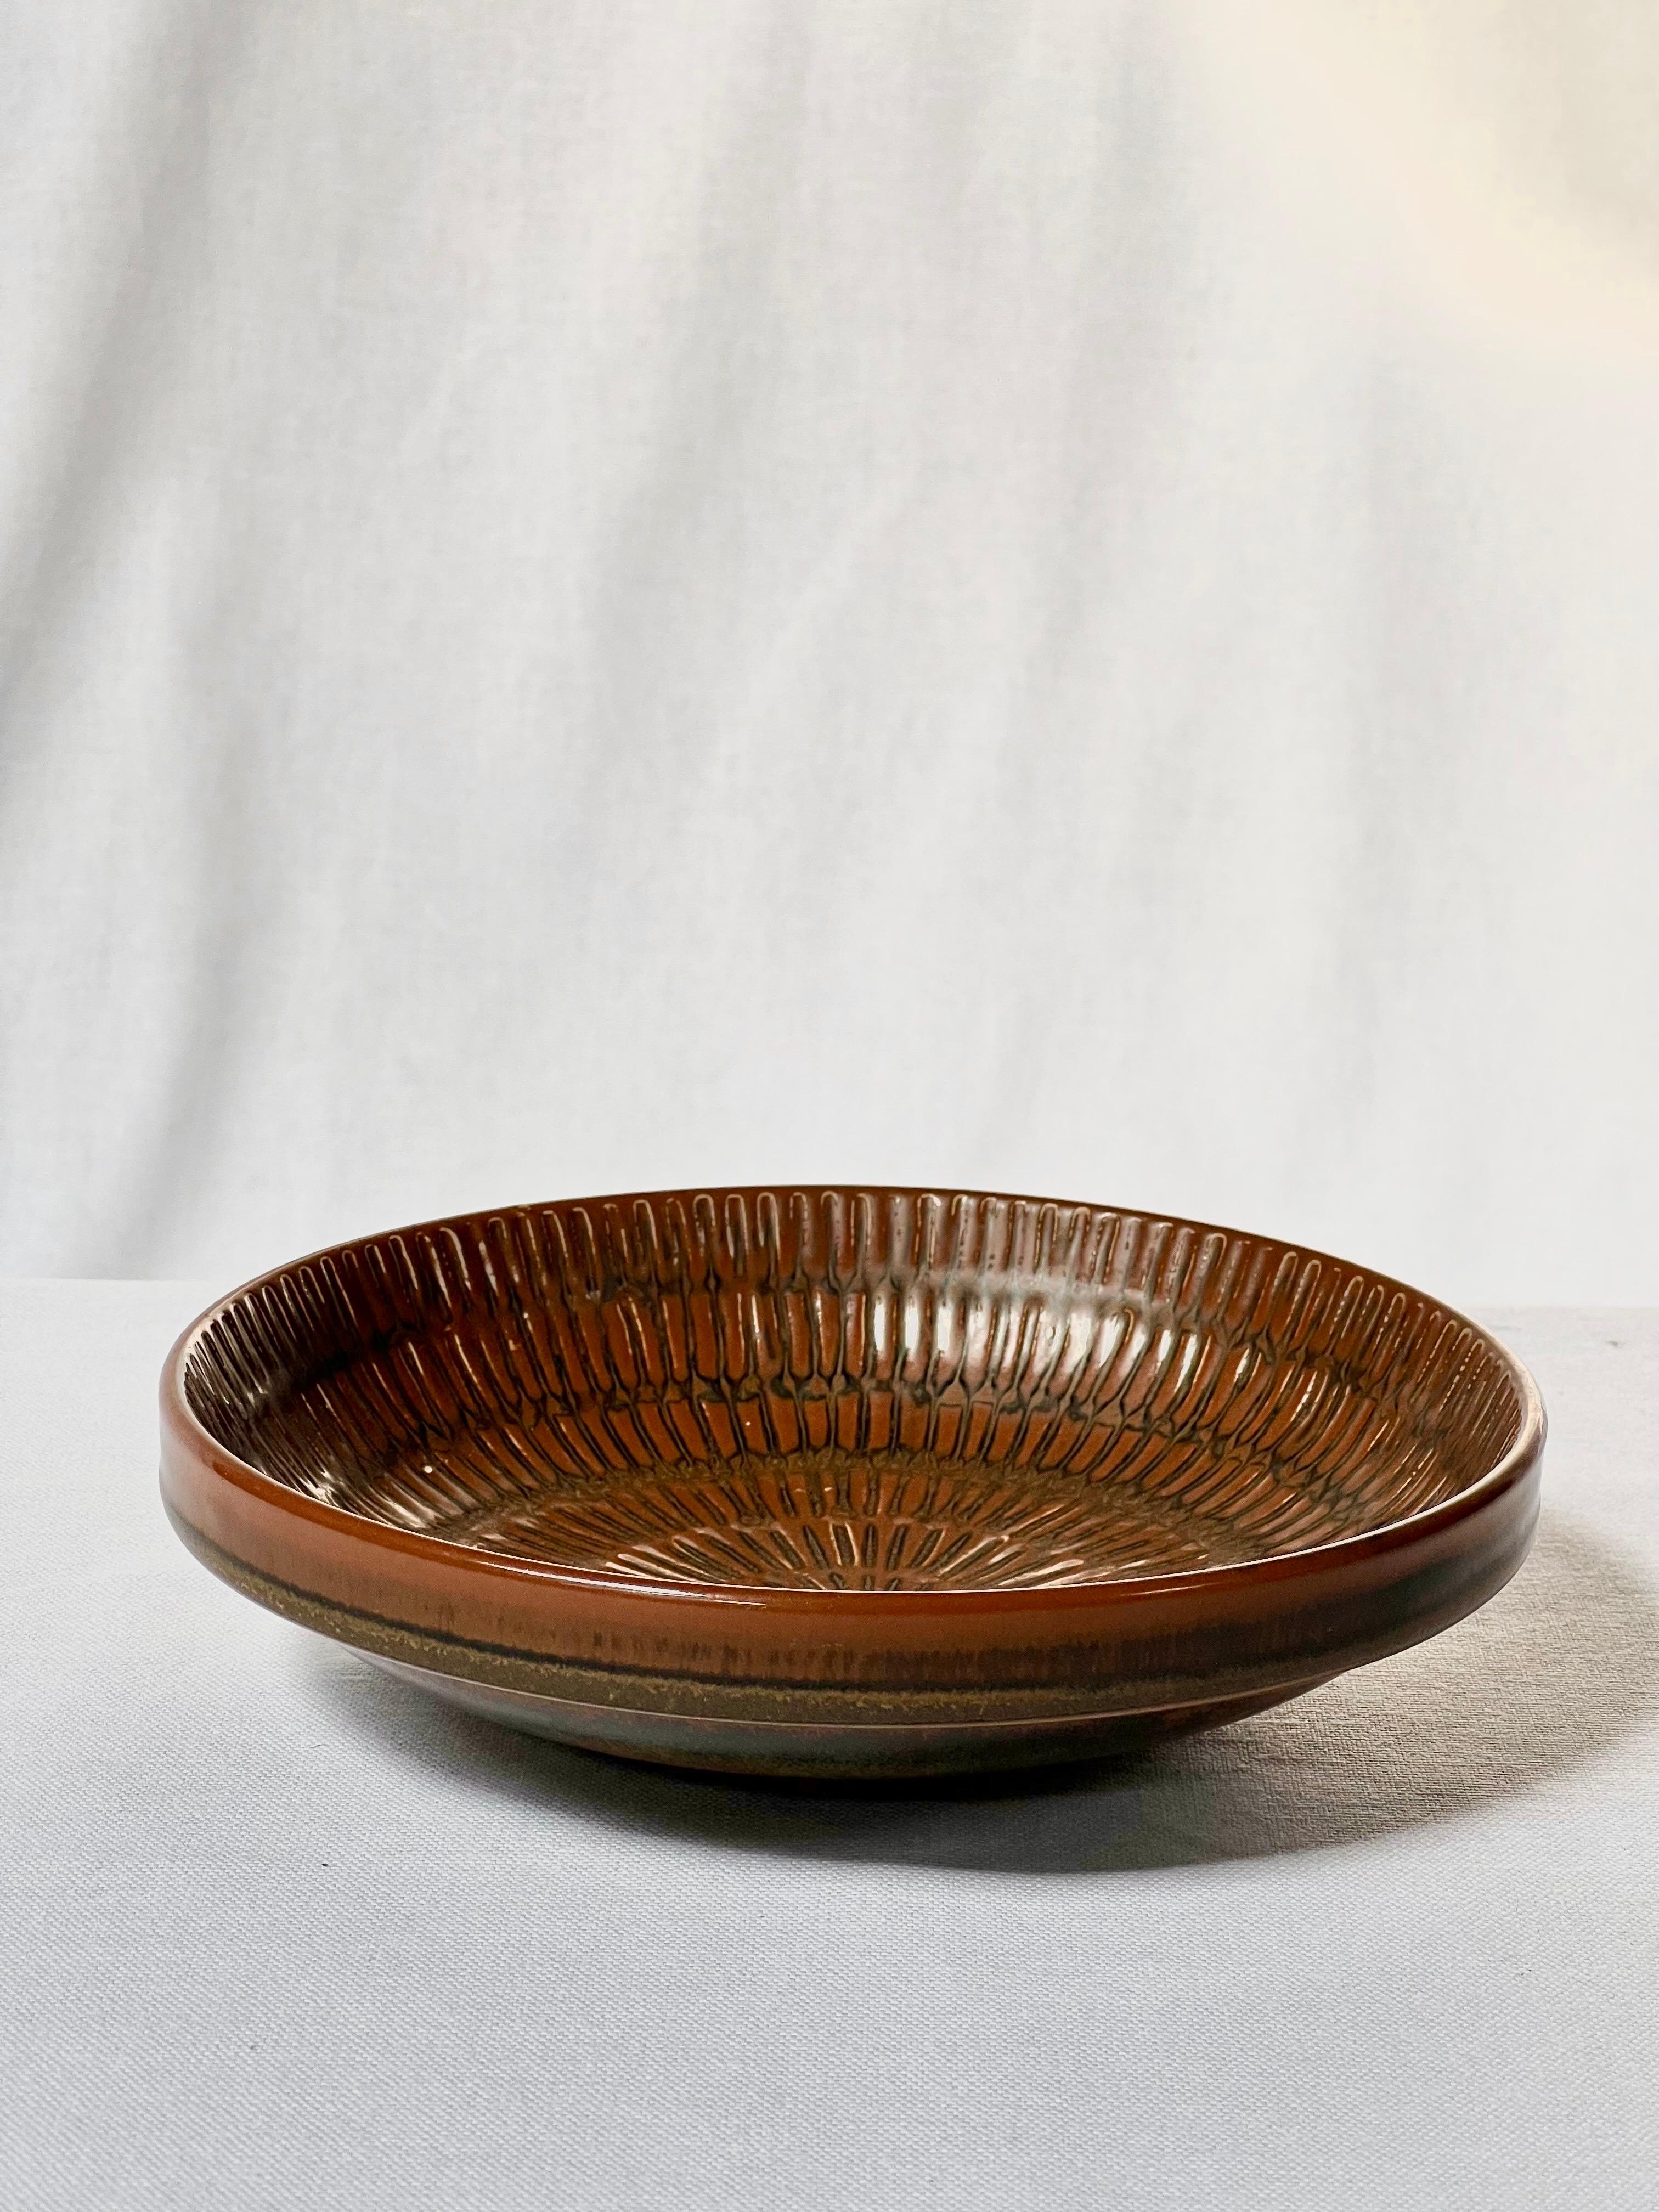 Brown glazed bowl / vide poche by Swedish master ceramicist Stig Lindberg. From light brown to dark brown. Elegant details and nice pattern. Unique piece made by hand and signed by the artist.



Stig Lindberg (17 August 1916 in Umeå, Sweden – 7